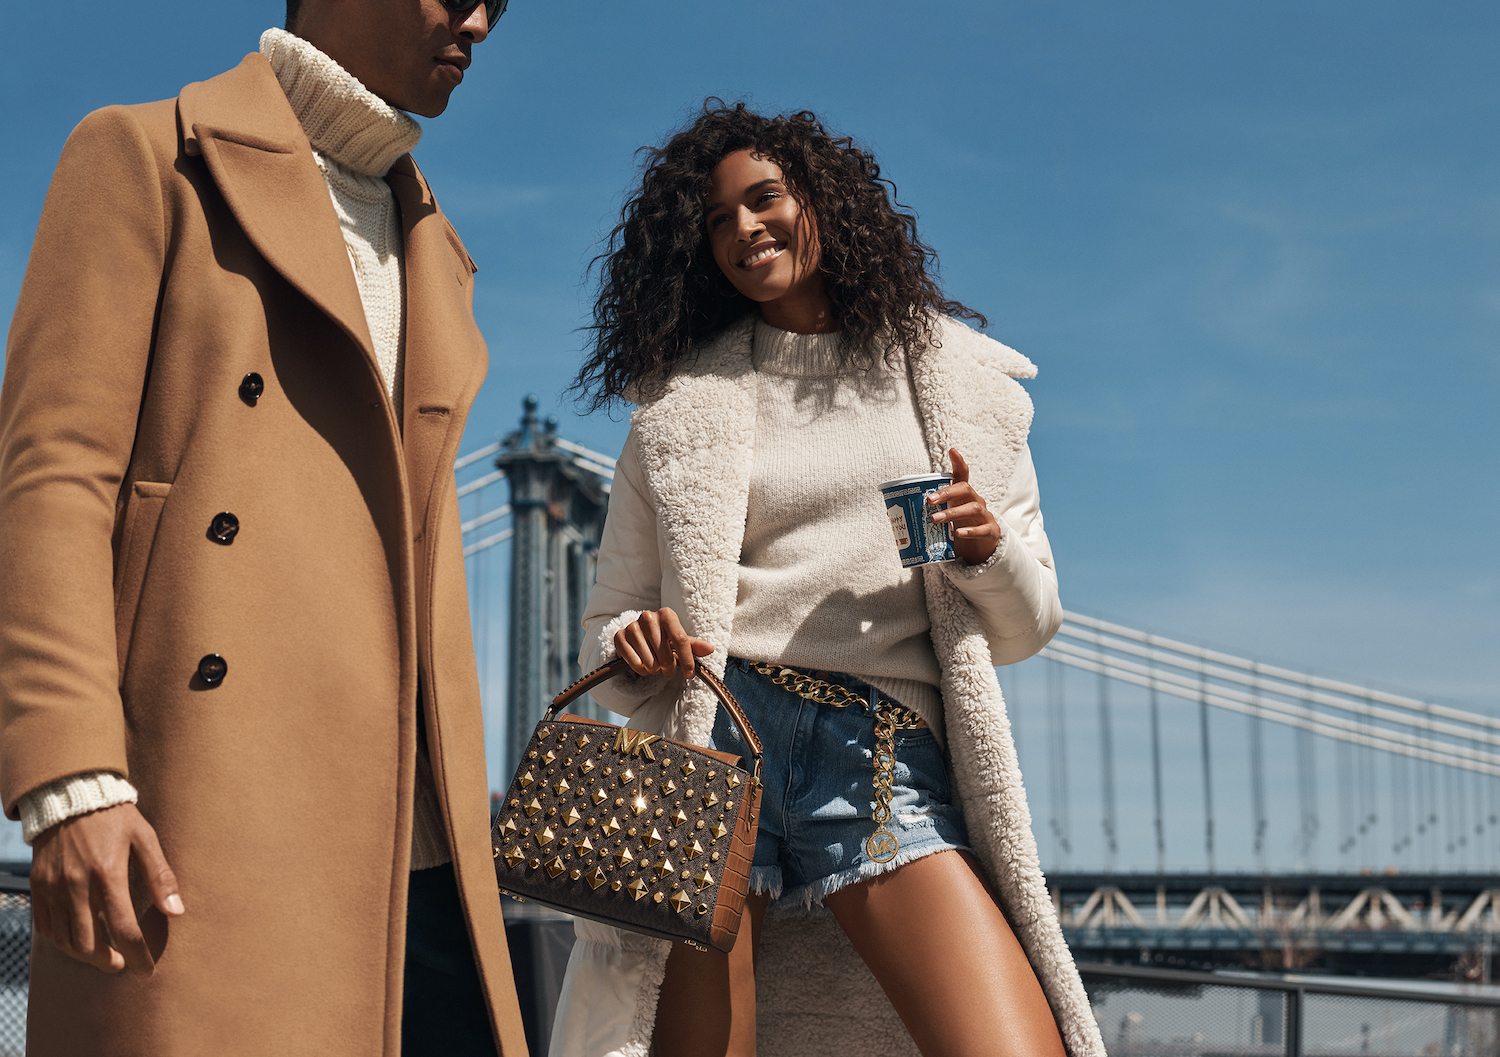 Michael Kors Introduces New Statement Print: The Empire Signature